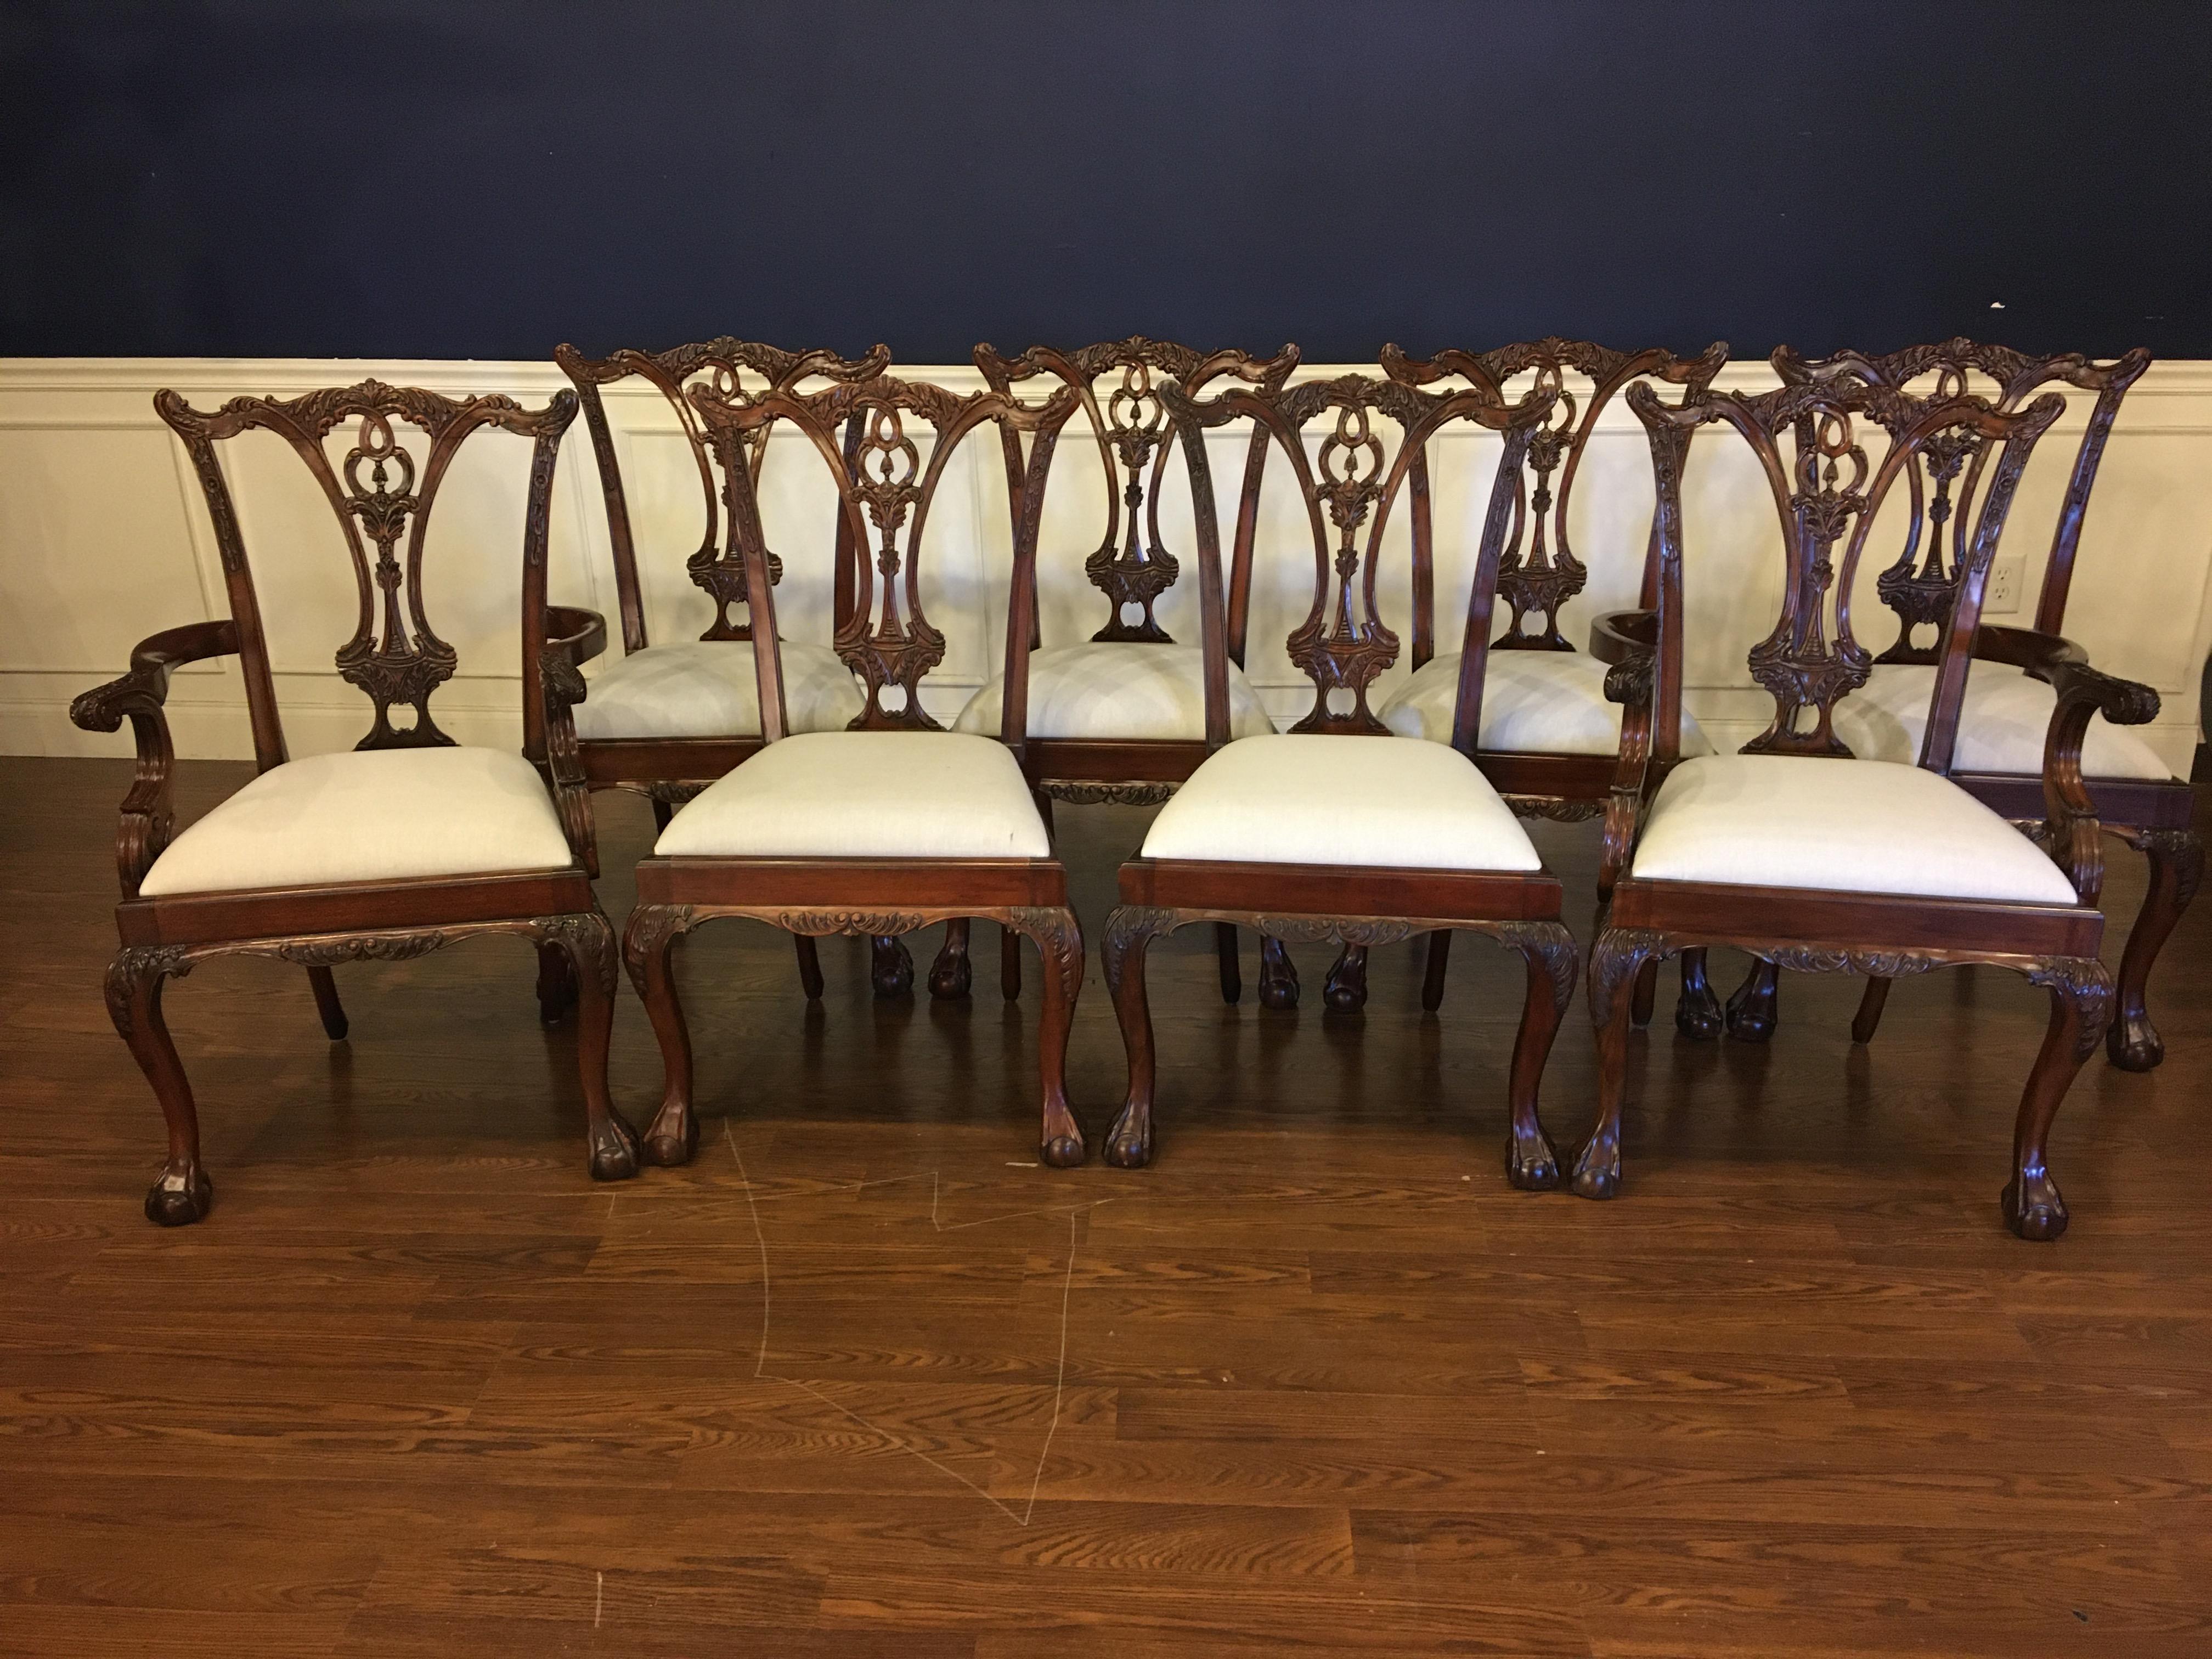 These are new traditional ball and claw Chippendale mahogany dining chairs. Their design was inspired by the English Chippendale dining chairs from the Regency period. They feature Classic Chippendale styling. They have a graceful elegance with